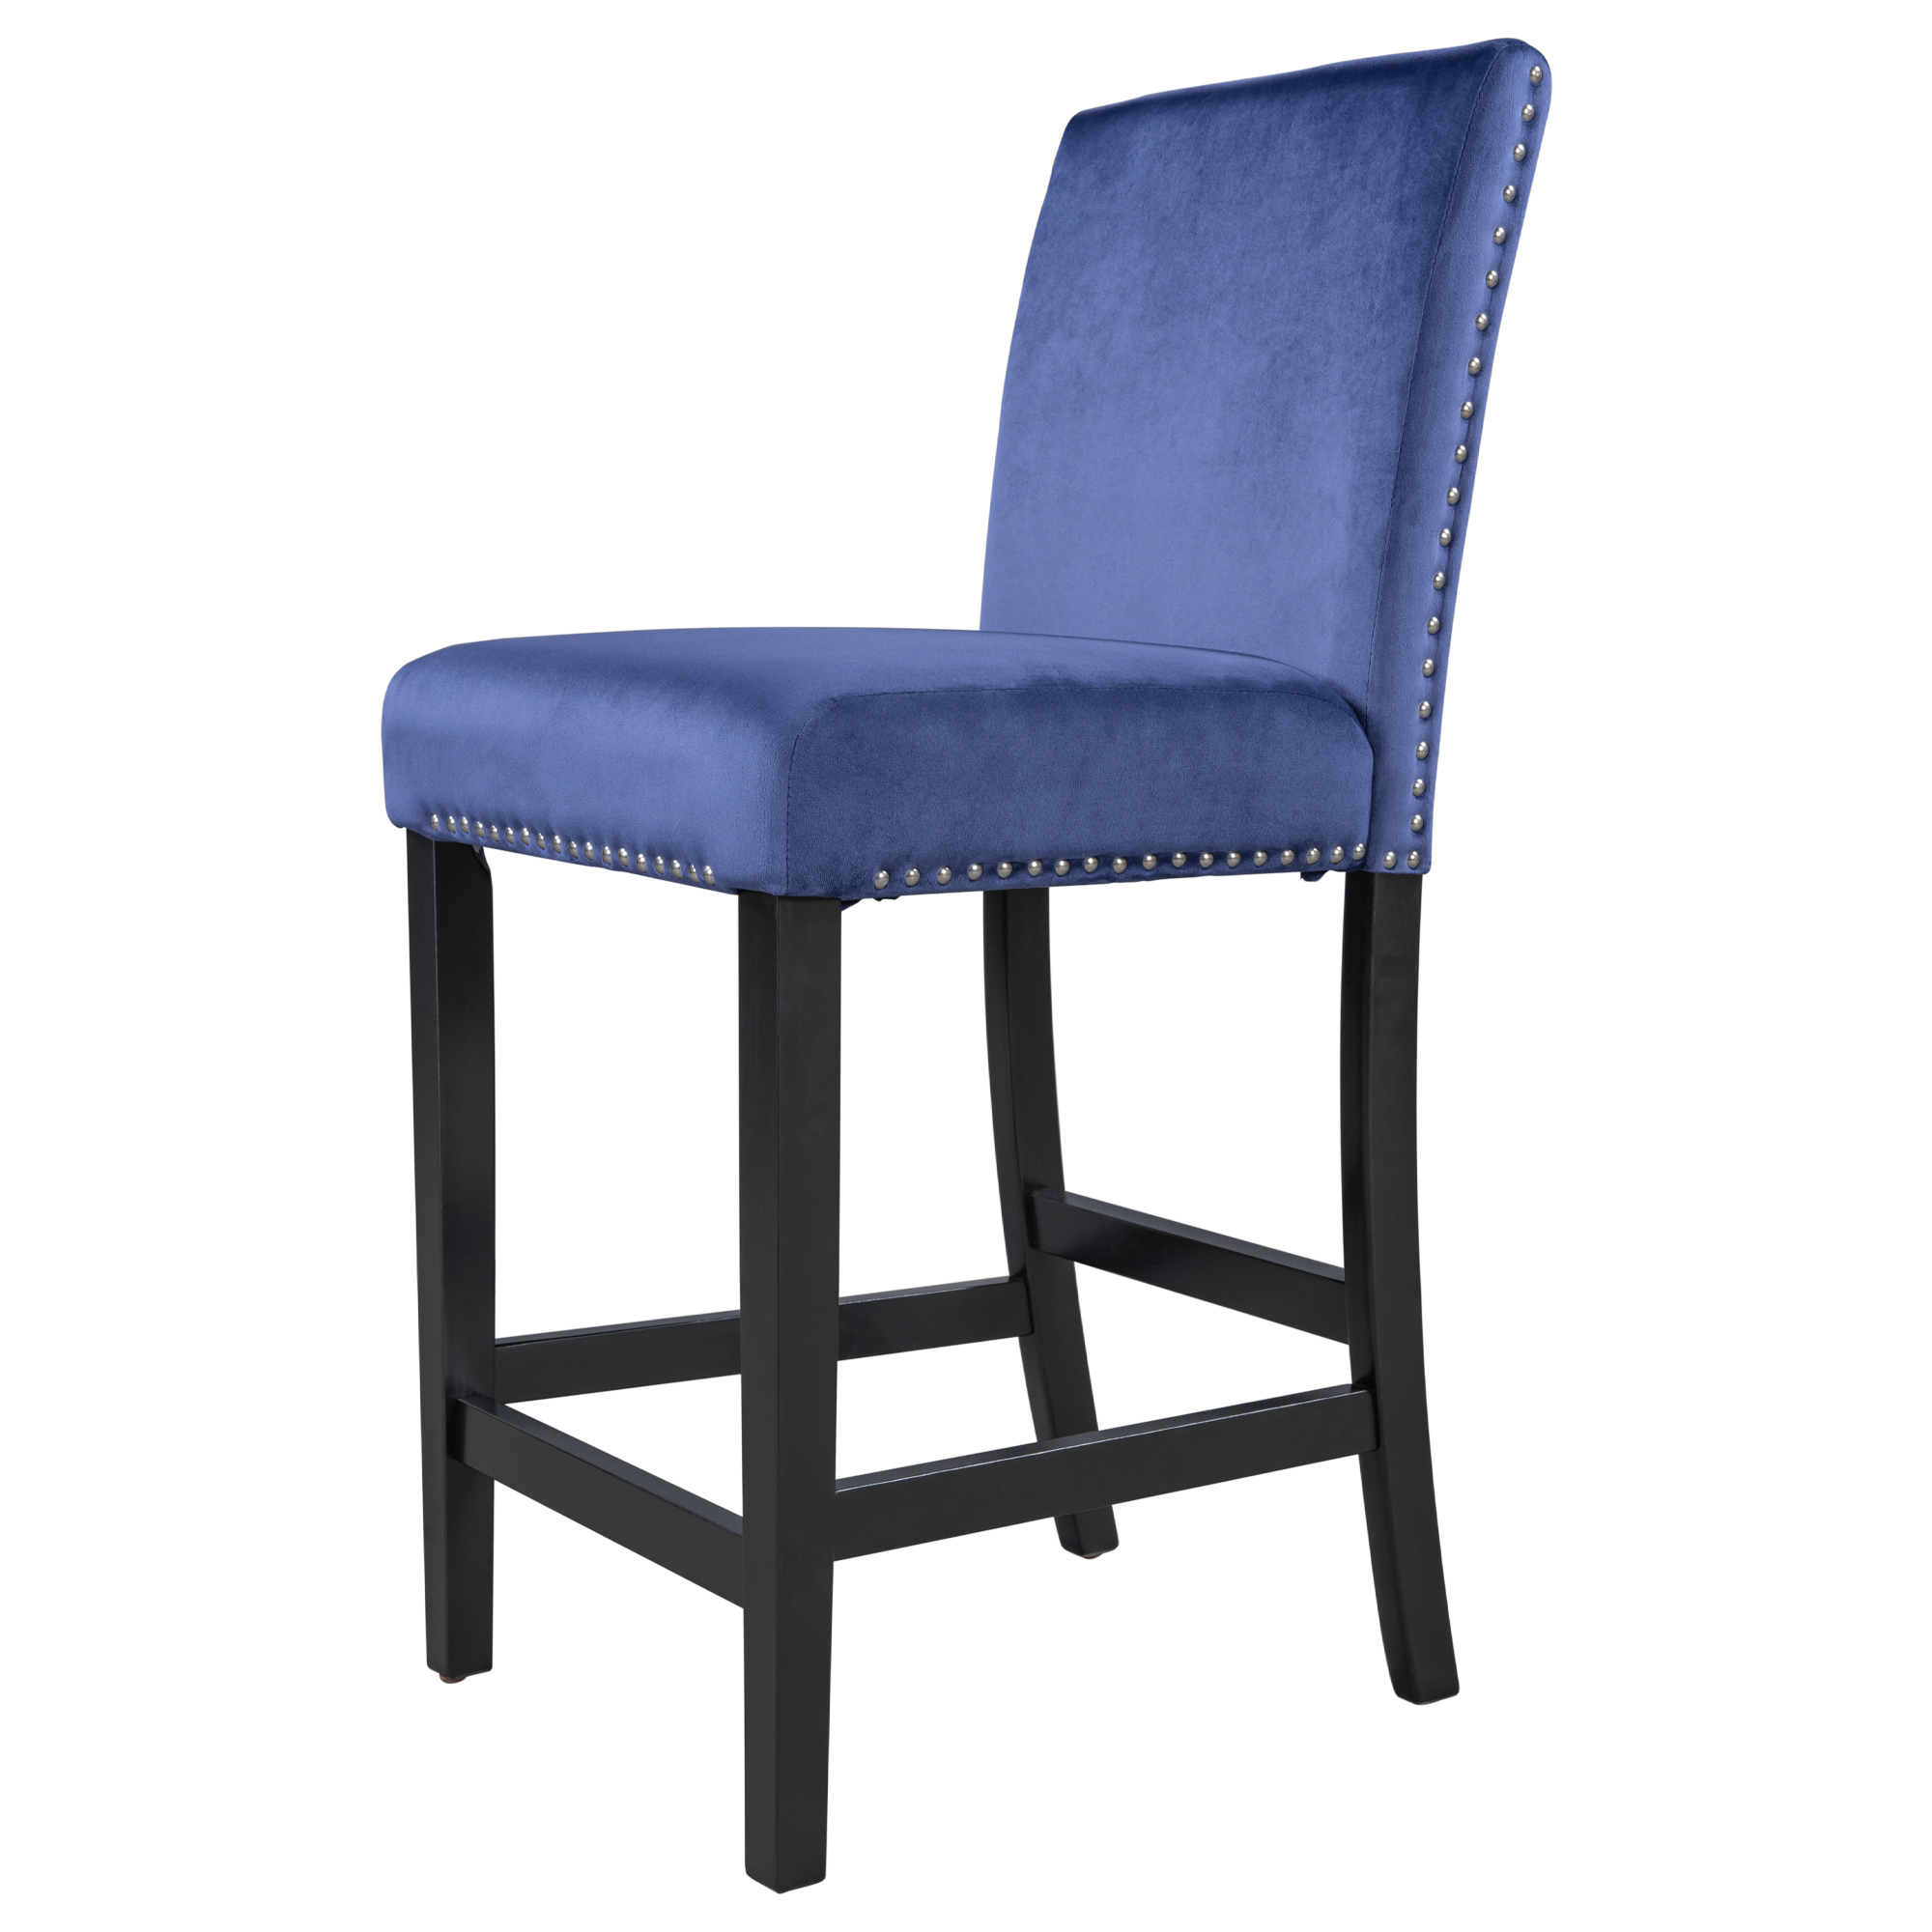 4 Pieces Wooden Counter Height Upholstered Dining Chairs for Small Places, Blue+Black Legs-Boyel Living